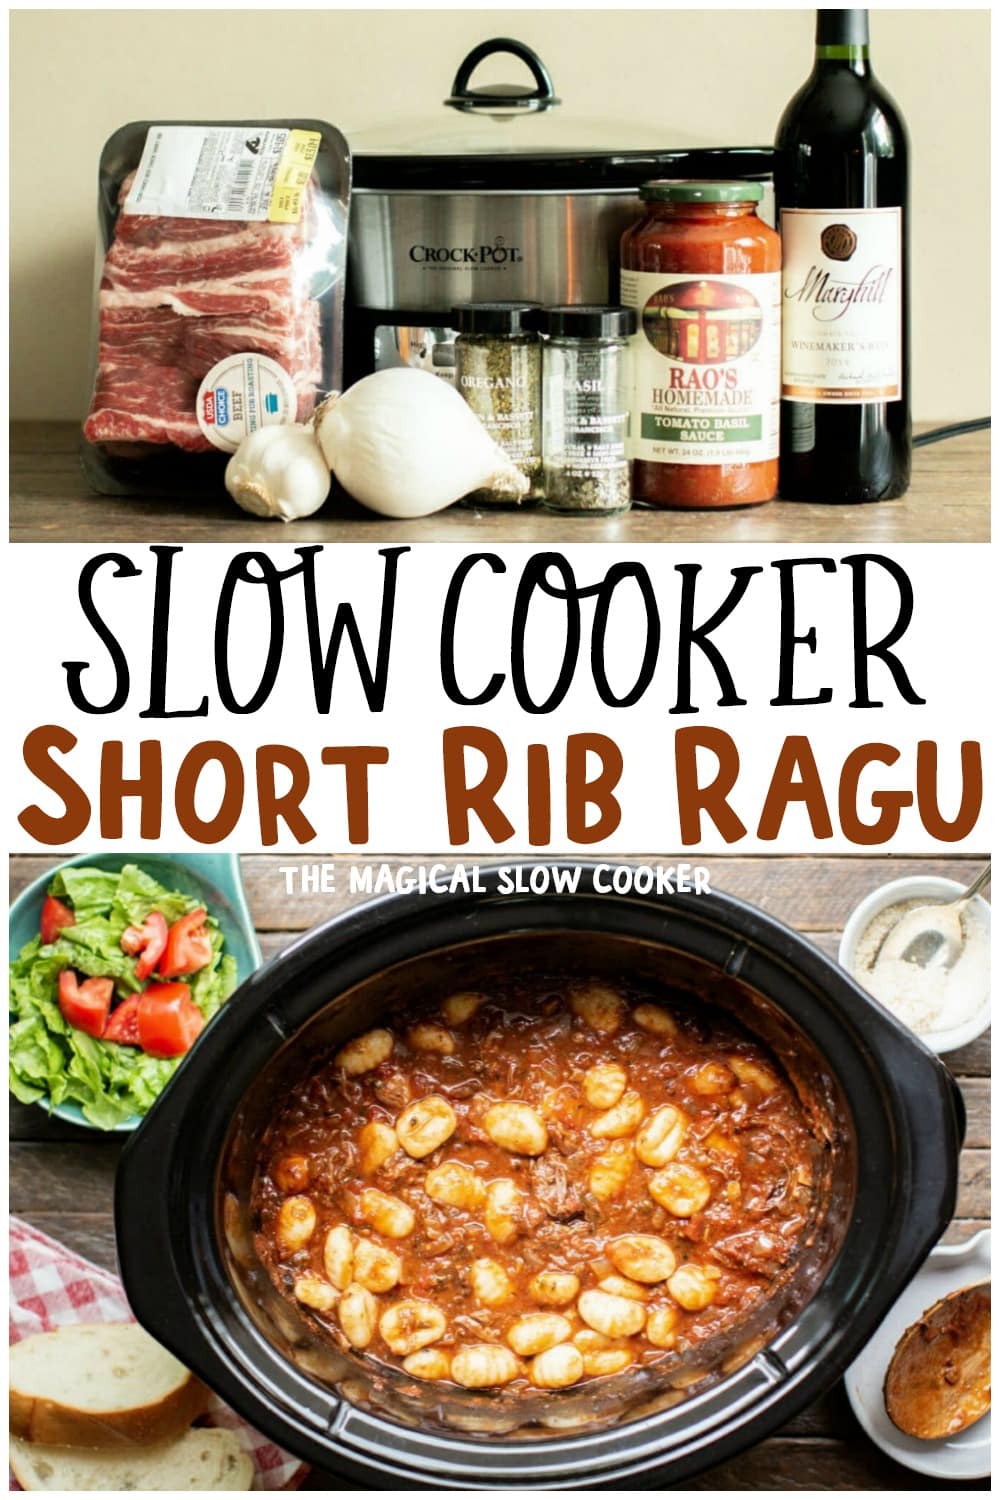 Slow Cooker Short Rib Ragu - The Magical Slow Cooker